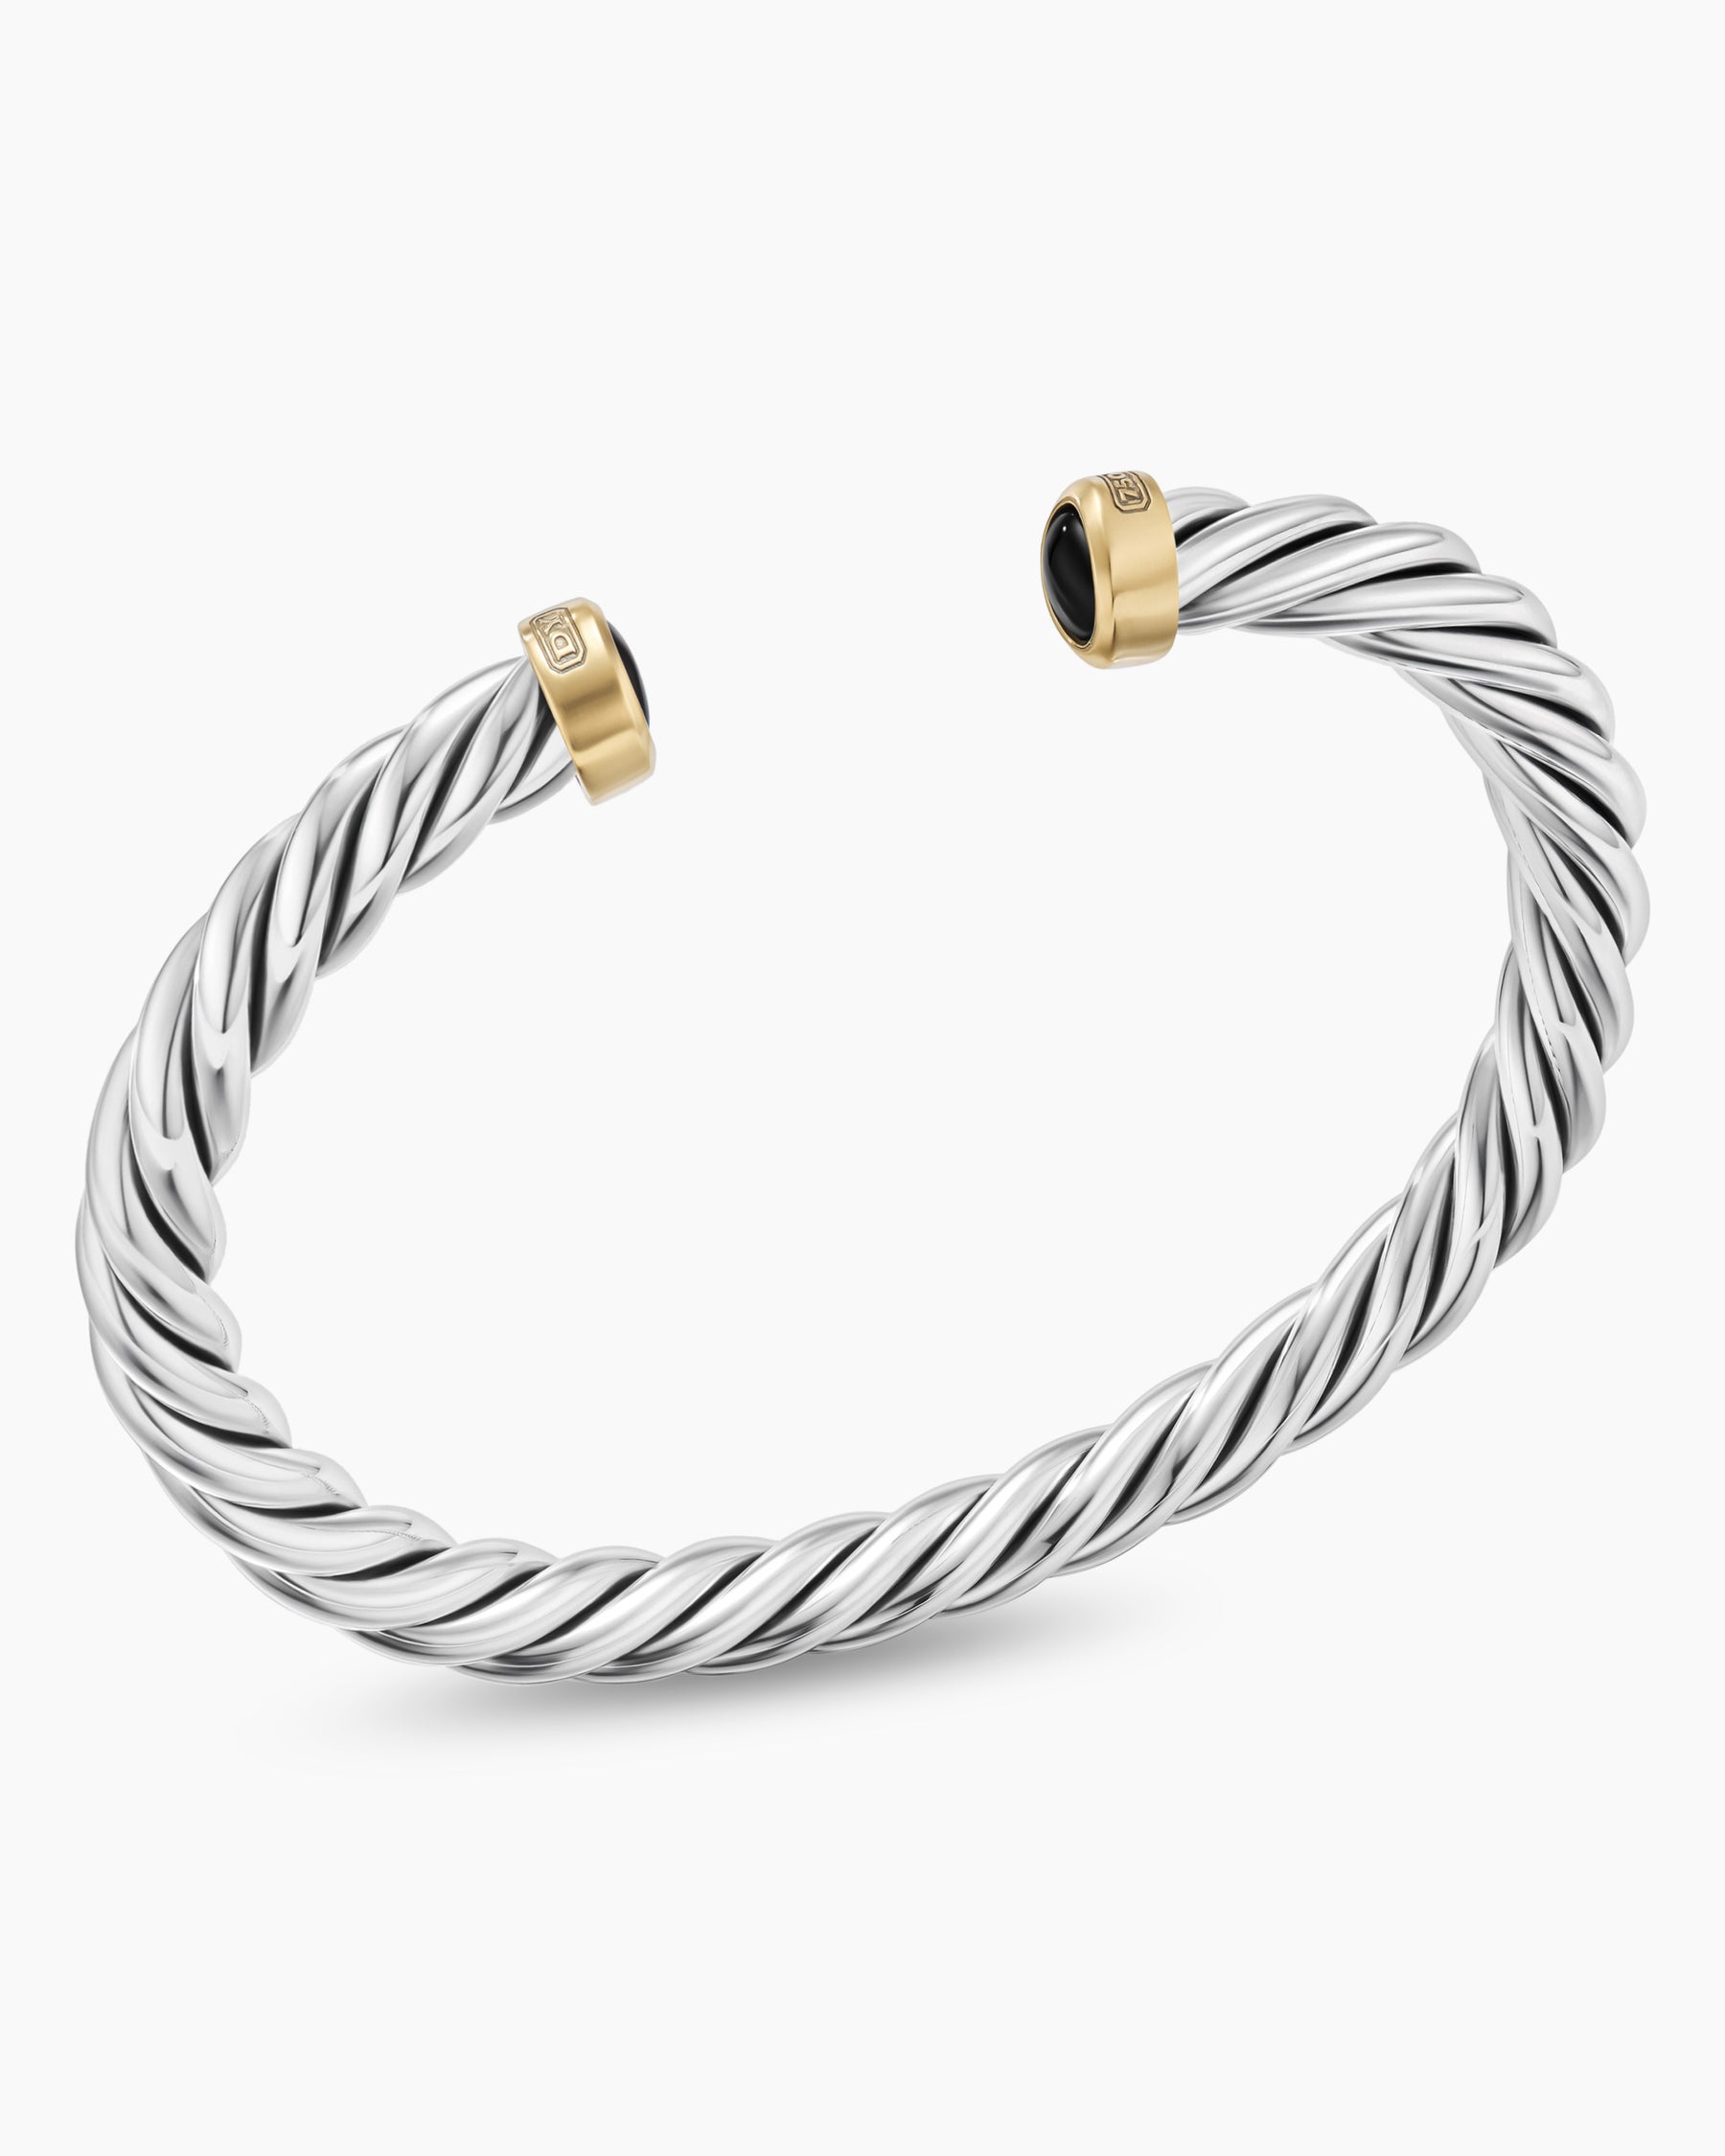 Cable Cuff Bracelet in Yellow Gold, Silver Yurman | Sterling David 18K 6mm with